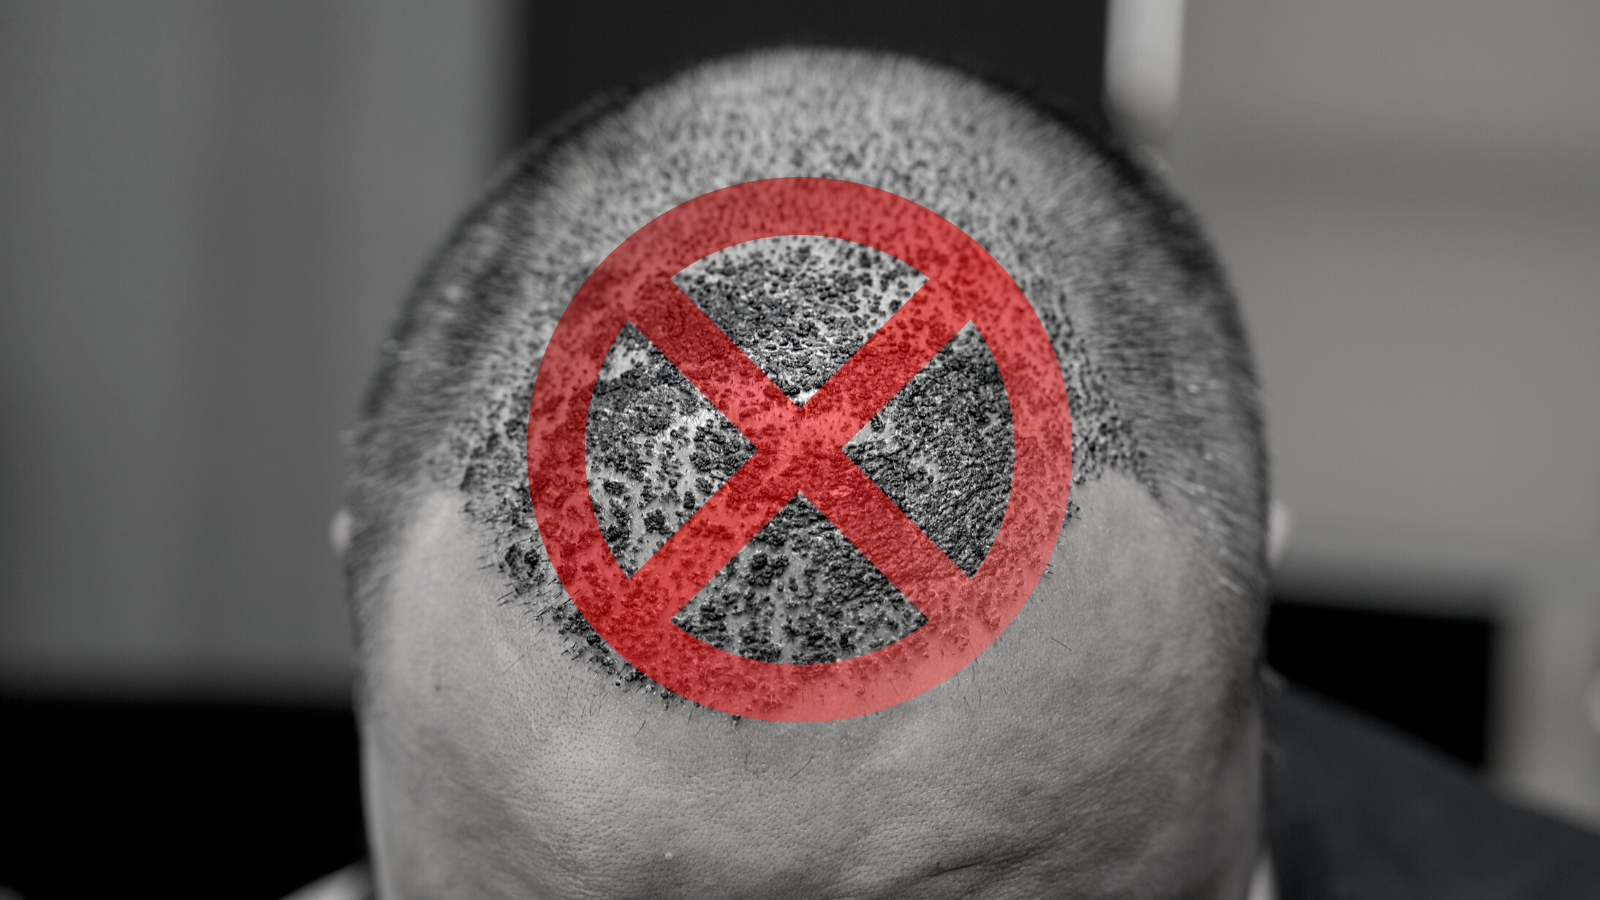 Why Clinics Don't Tell About Hair Transplants That Go Wrong